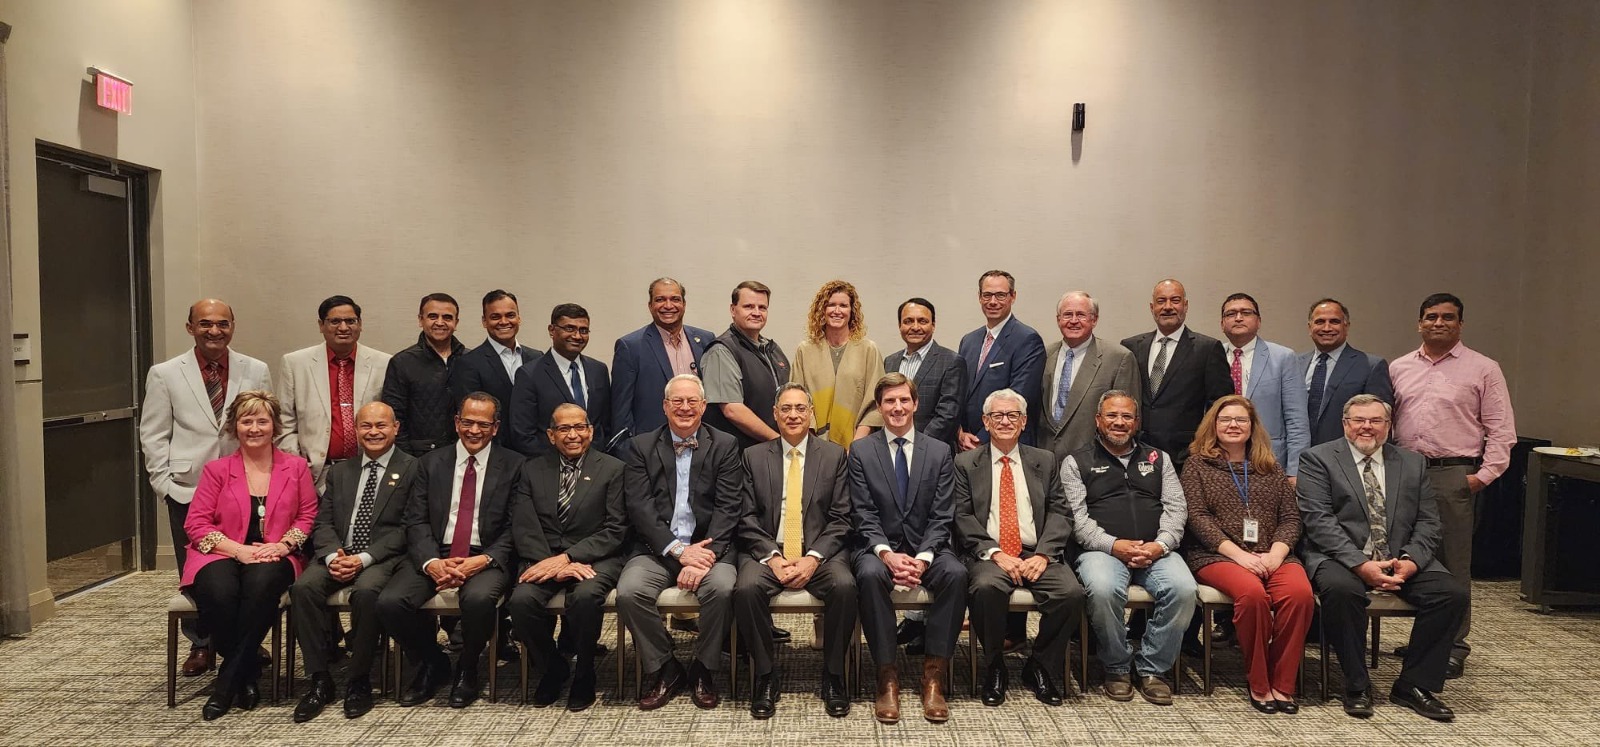 Consul General interacted with elected officials, business leaders& professionals media of Odessa/Midland, Permian Basin, Texas on December 5,2022